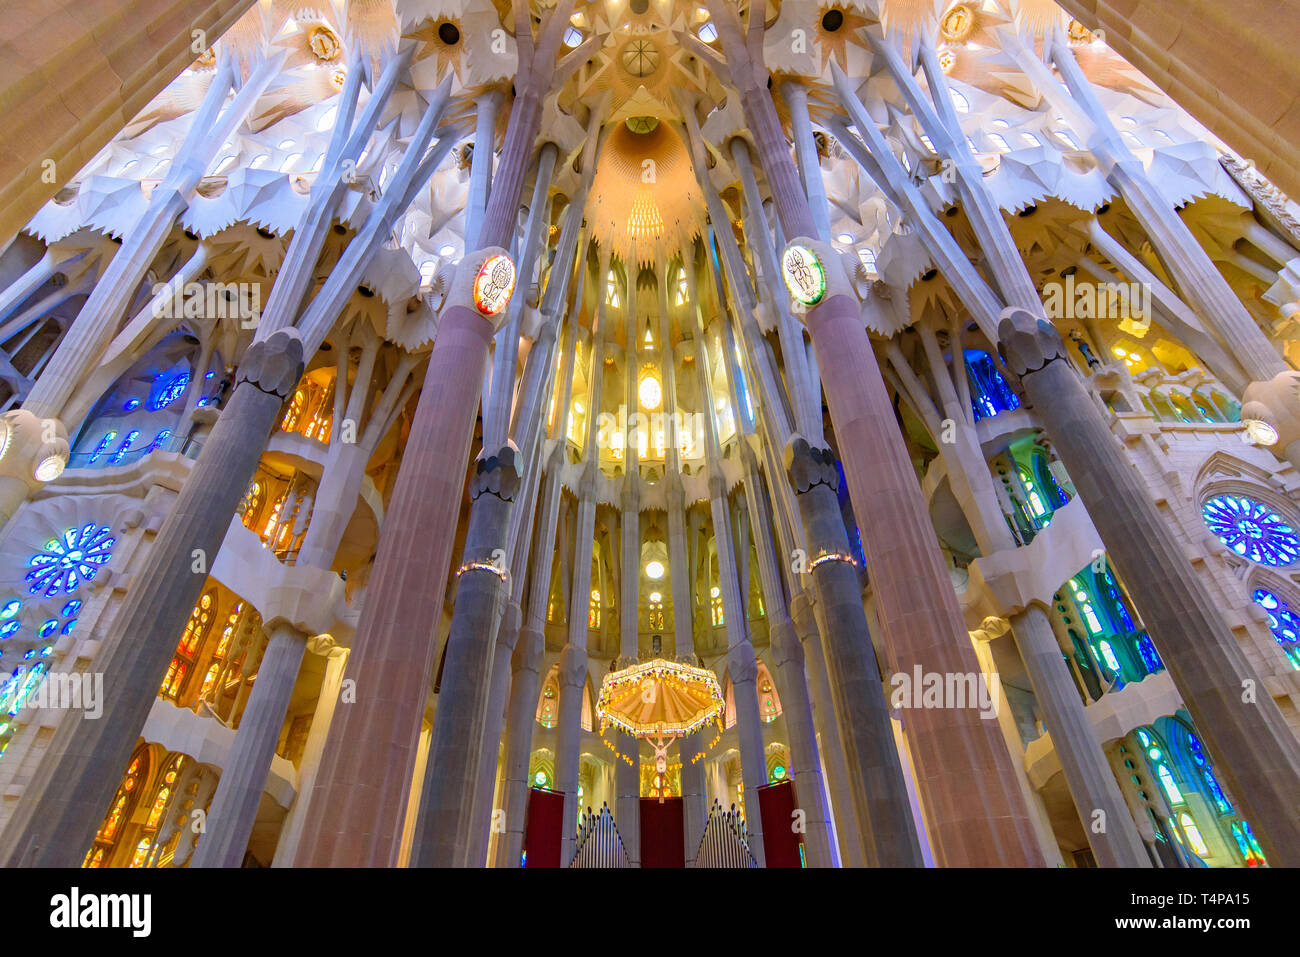 The interior of Sagrada Familia (Church of the Holy Family), the cathedral designed by Gaudi in Barcelona, Spain Stock Photo